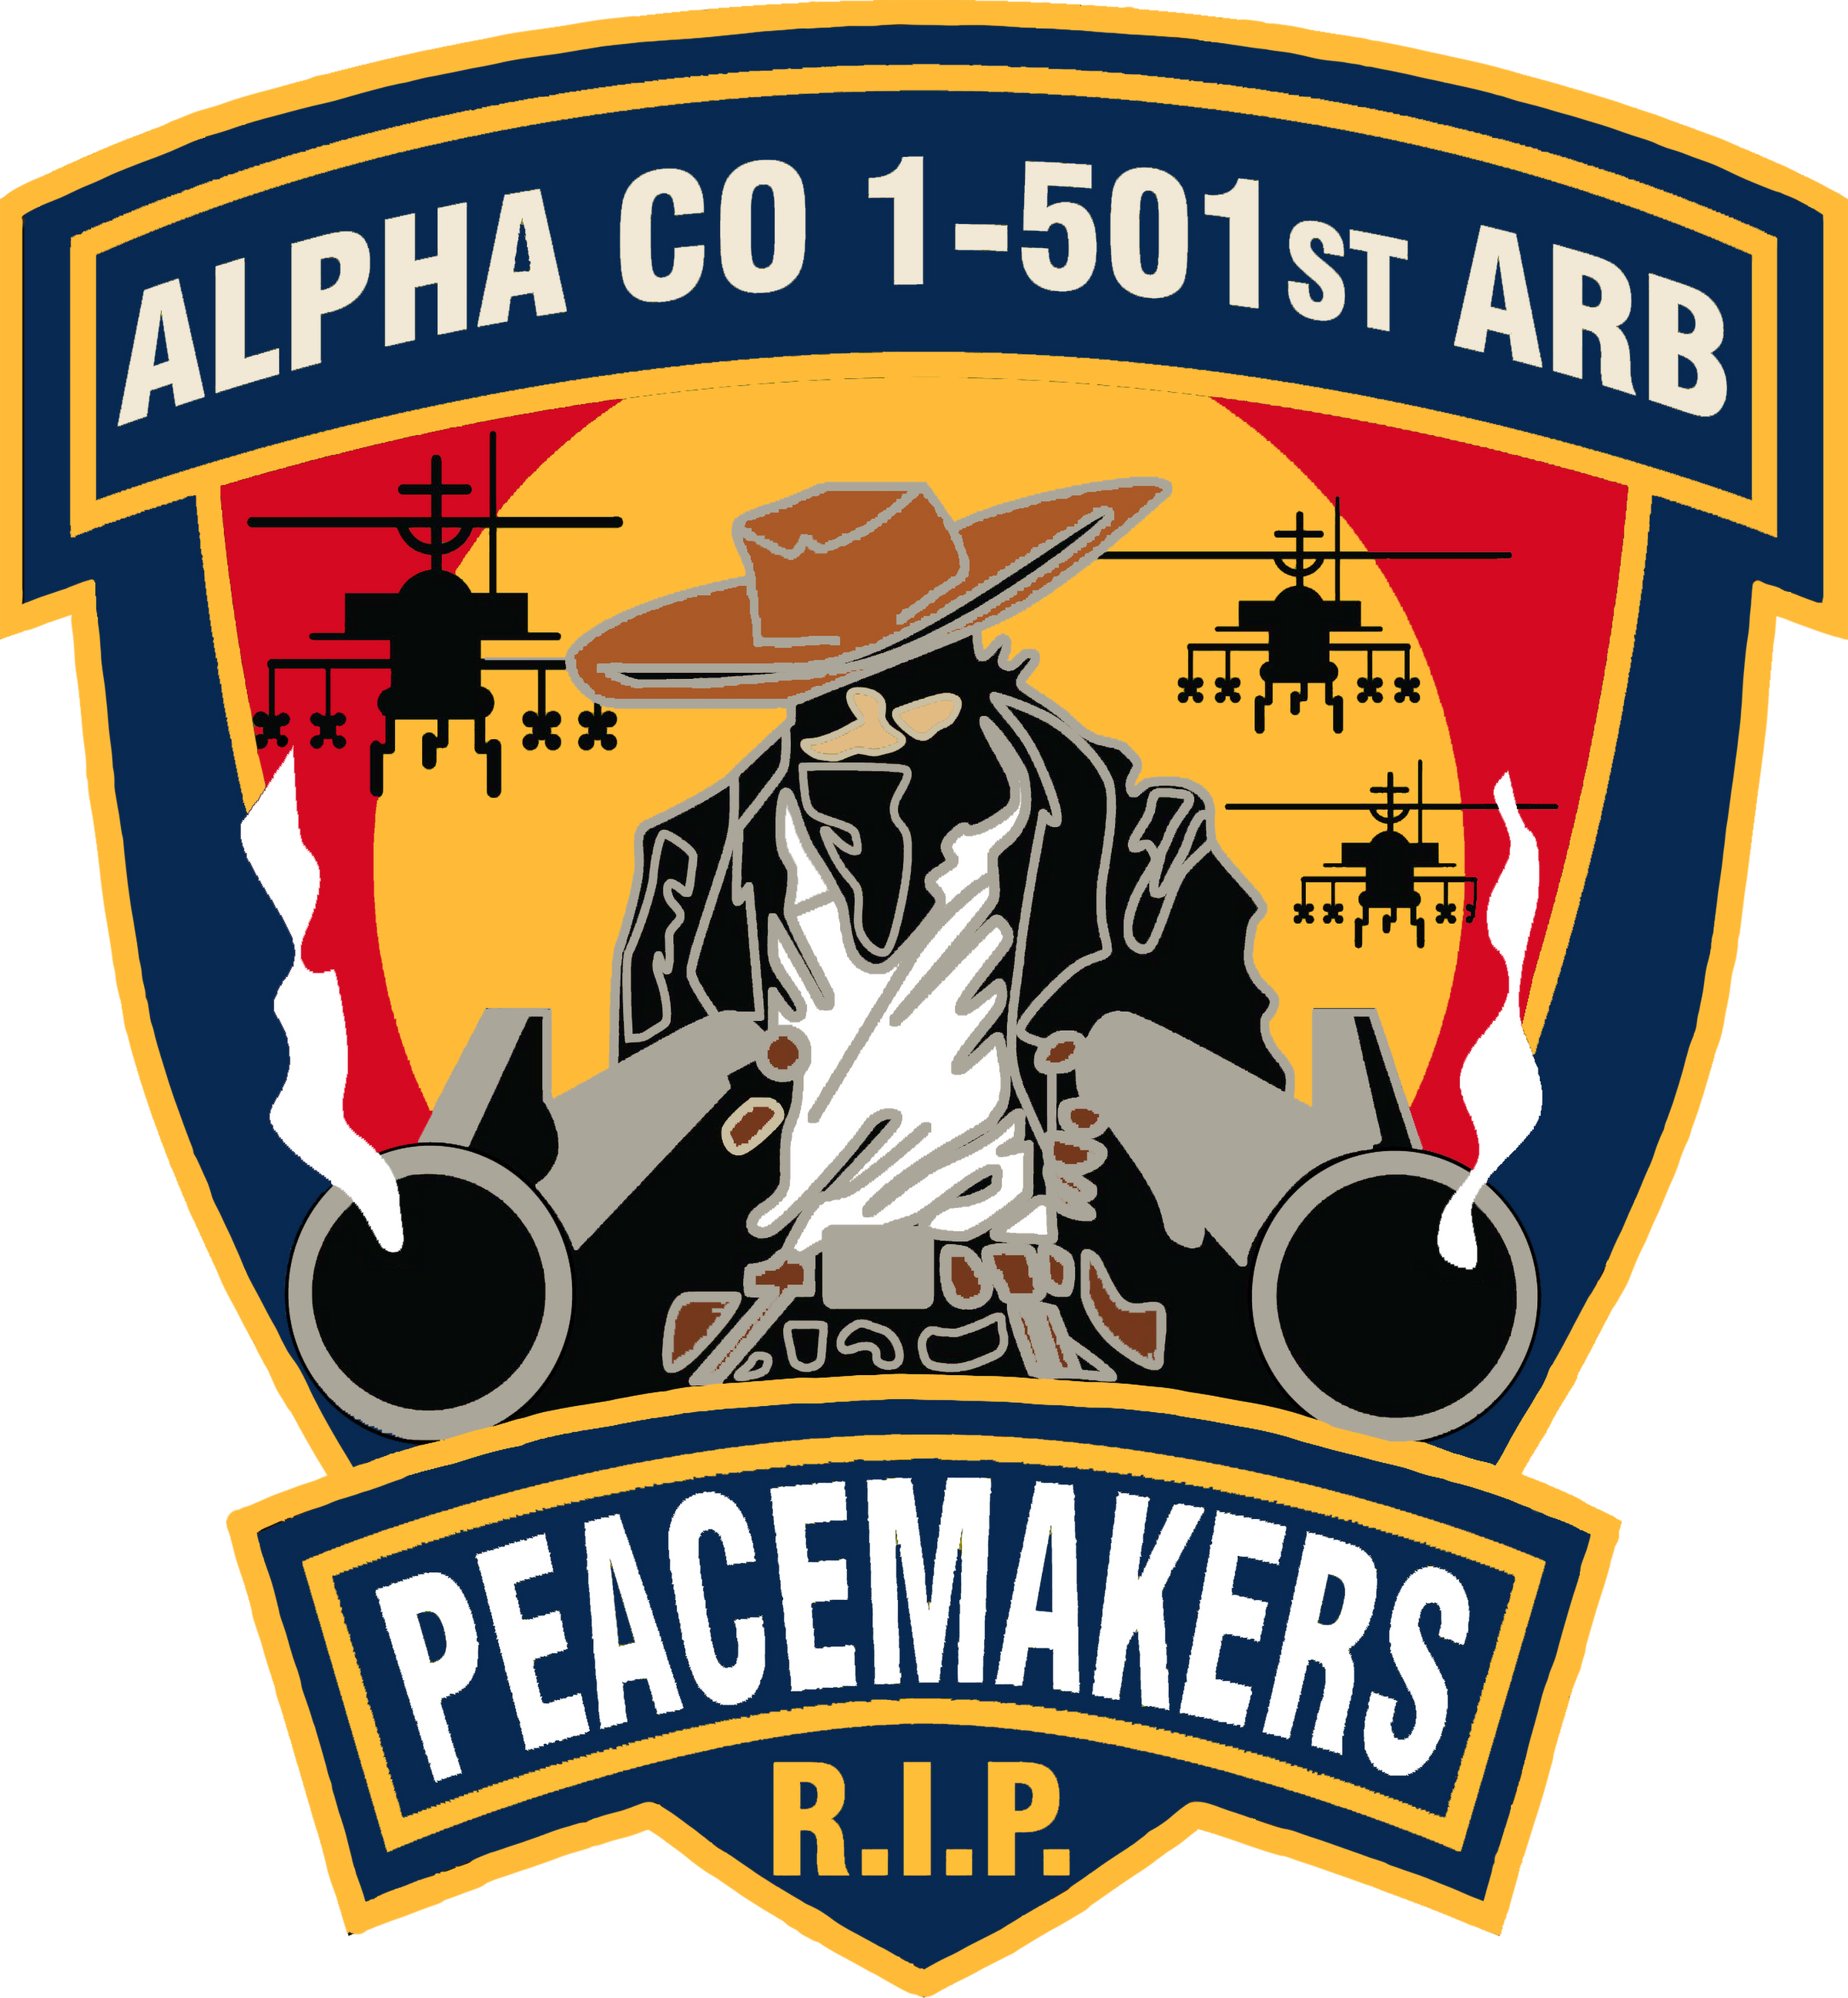 A Co, 1-501 ARB "Peacemakers"